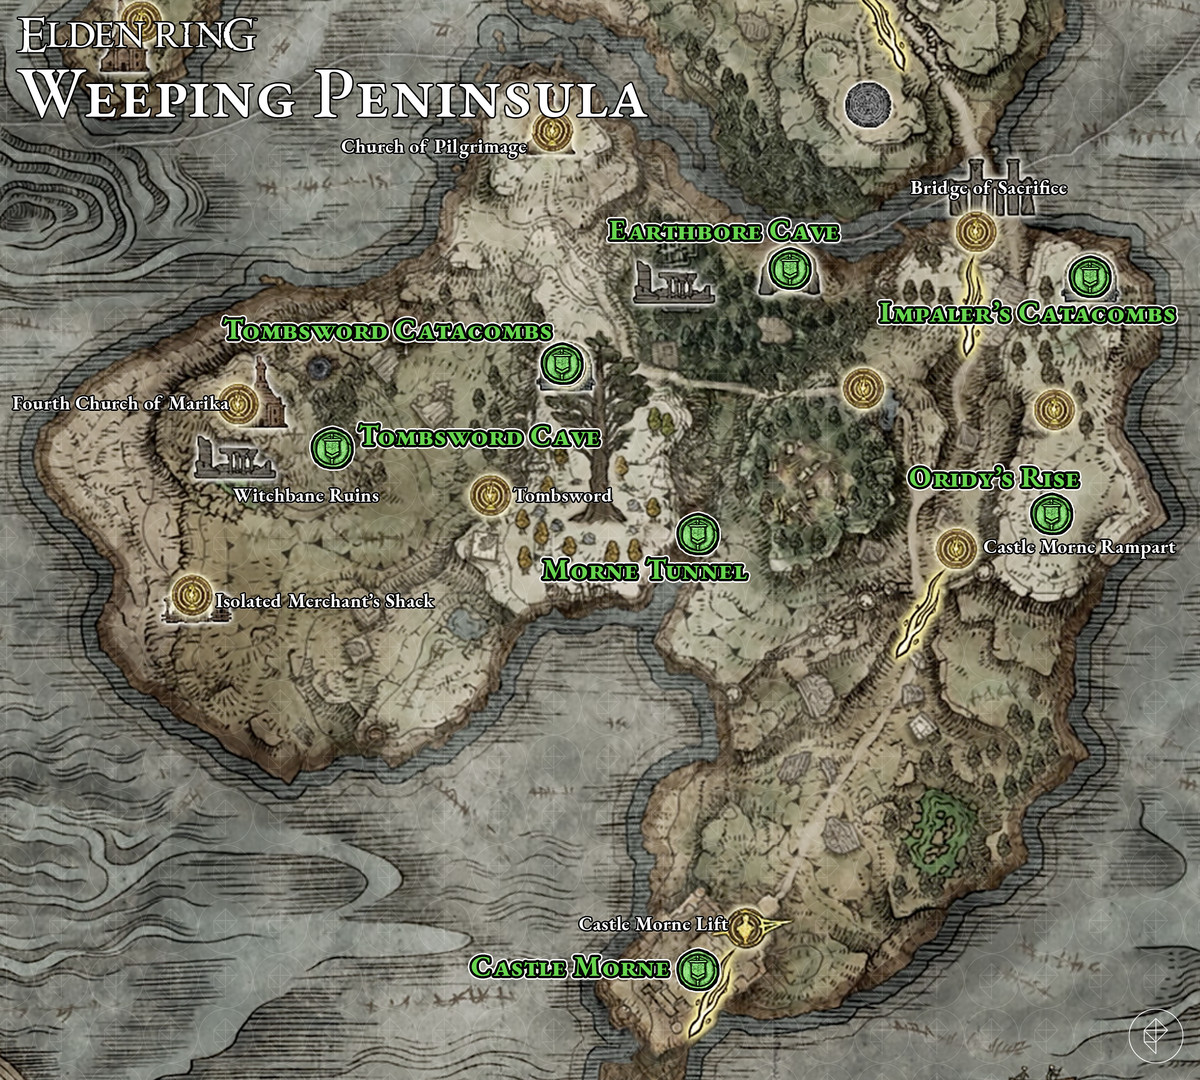 Elden Ring guide Weeping Peninsula dungeon locations and rewards Anh